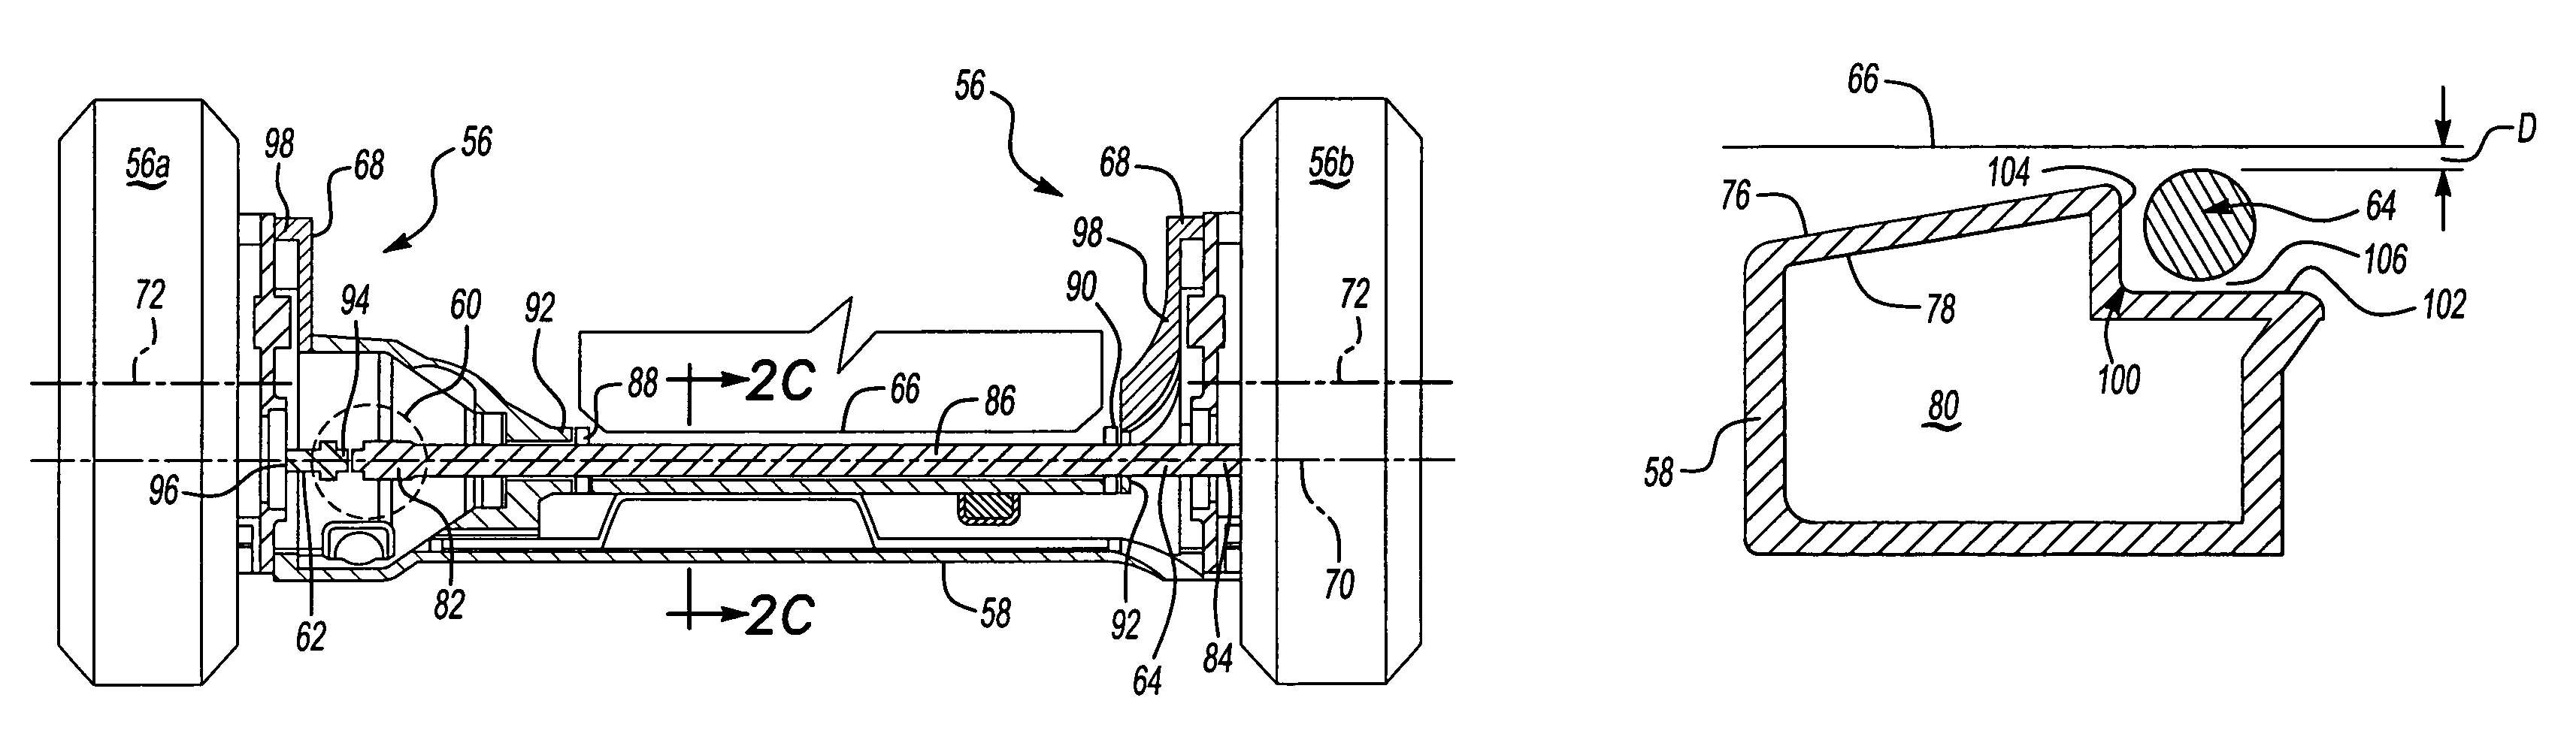 External shaft low floor drive axle assembly